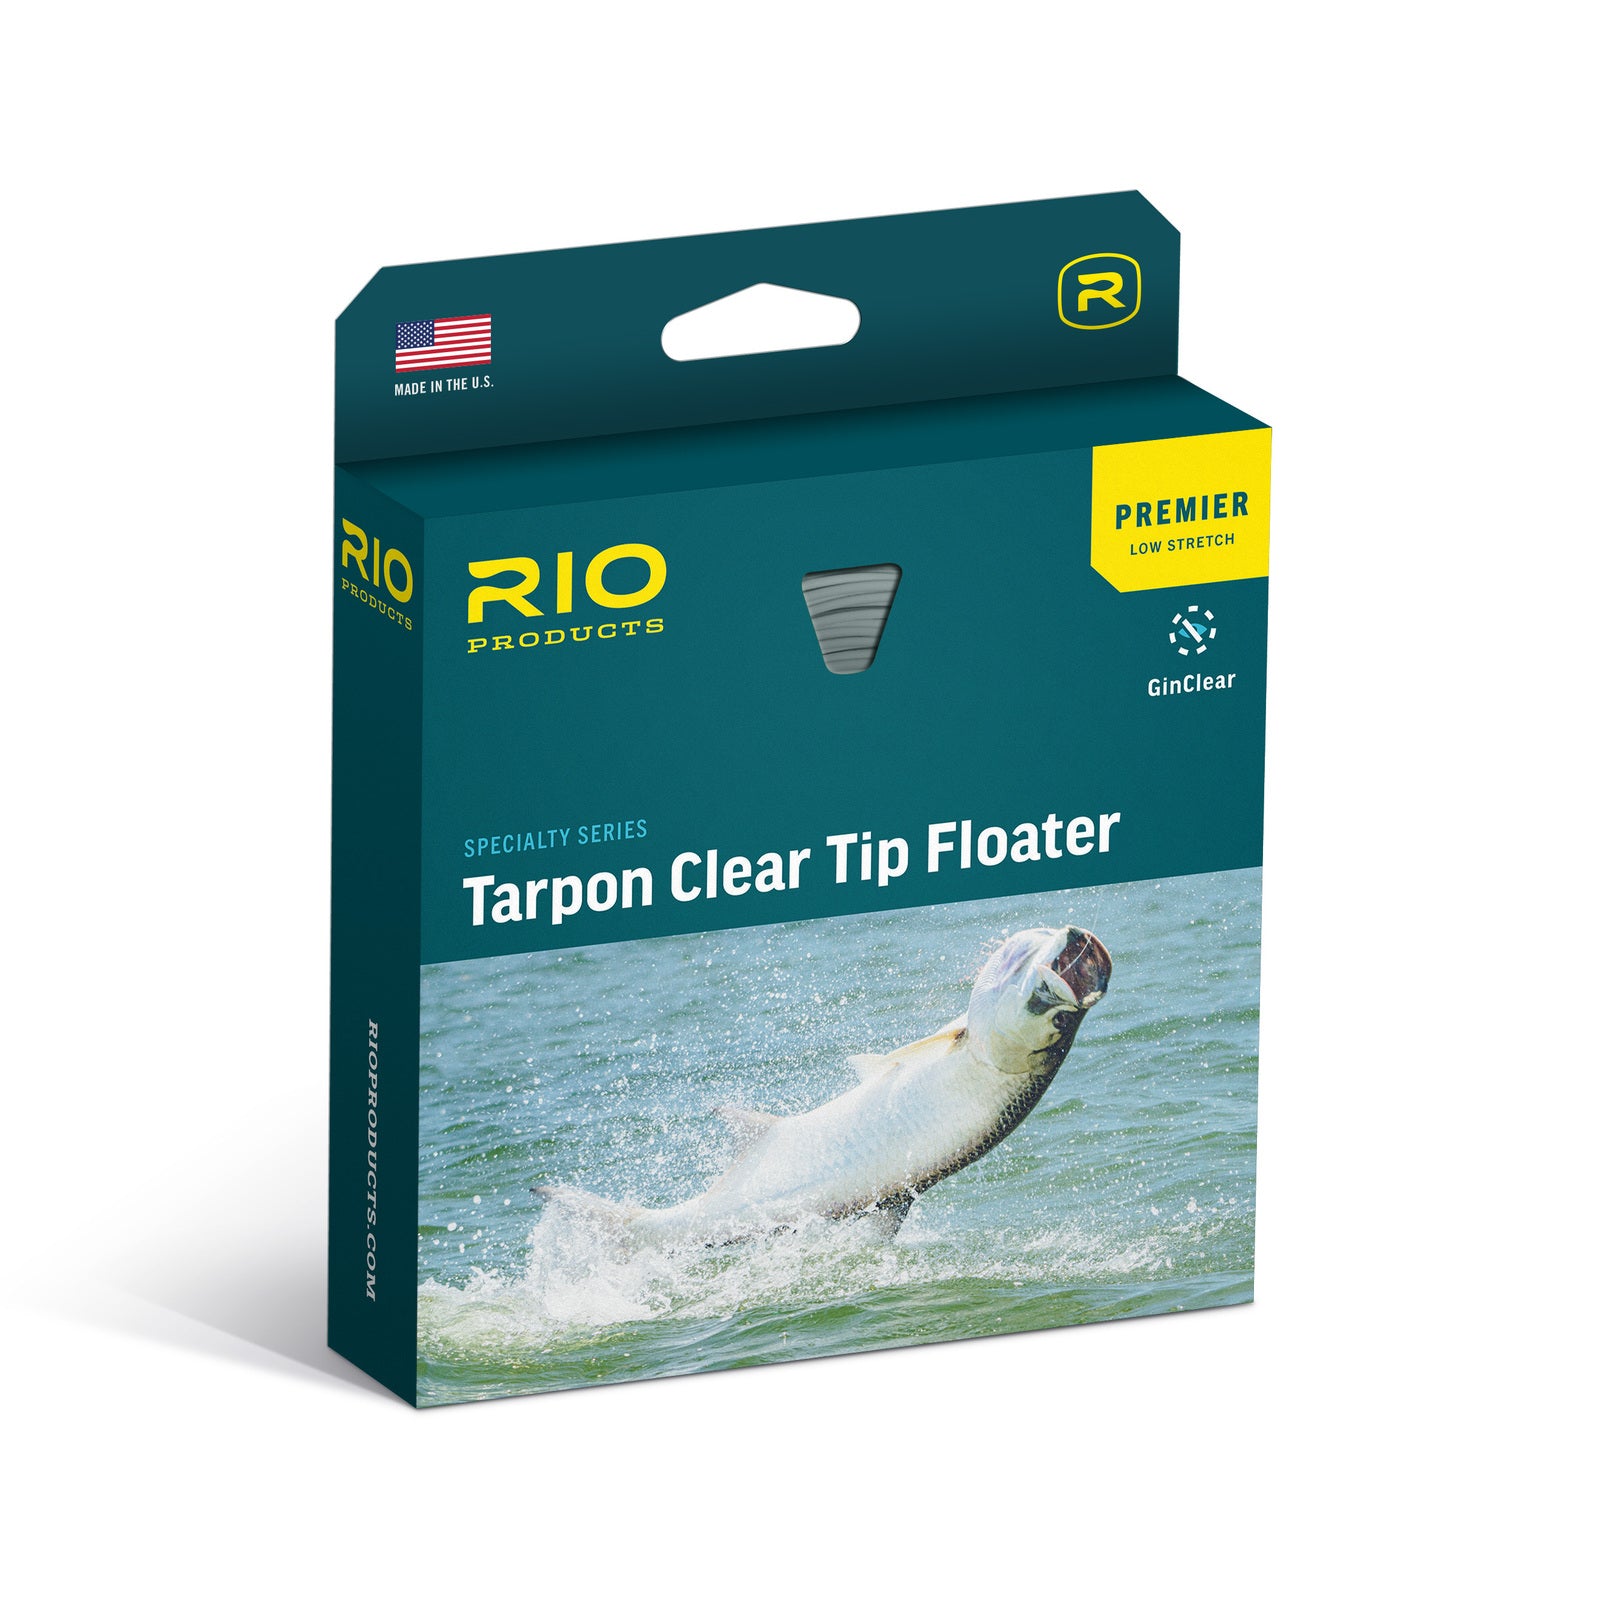 RIO Premier Tarpon Clear Tip Floater Saltwater Fly Line - NEW!